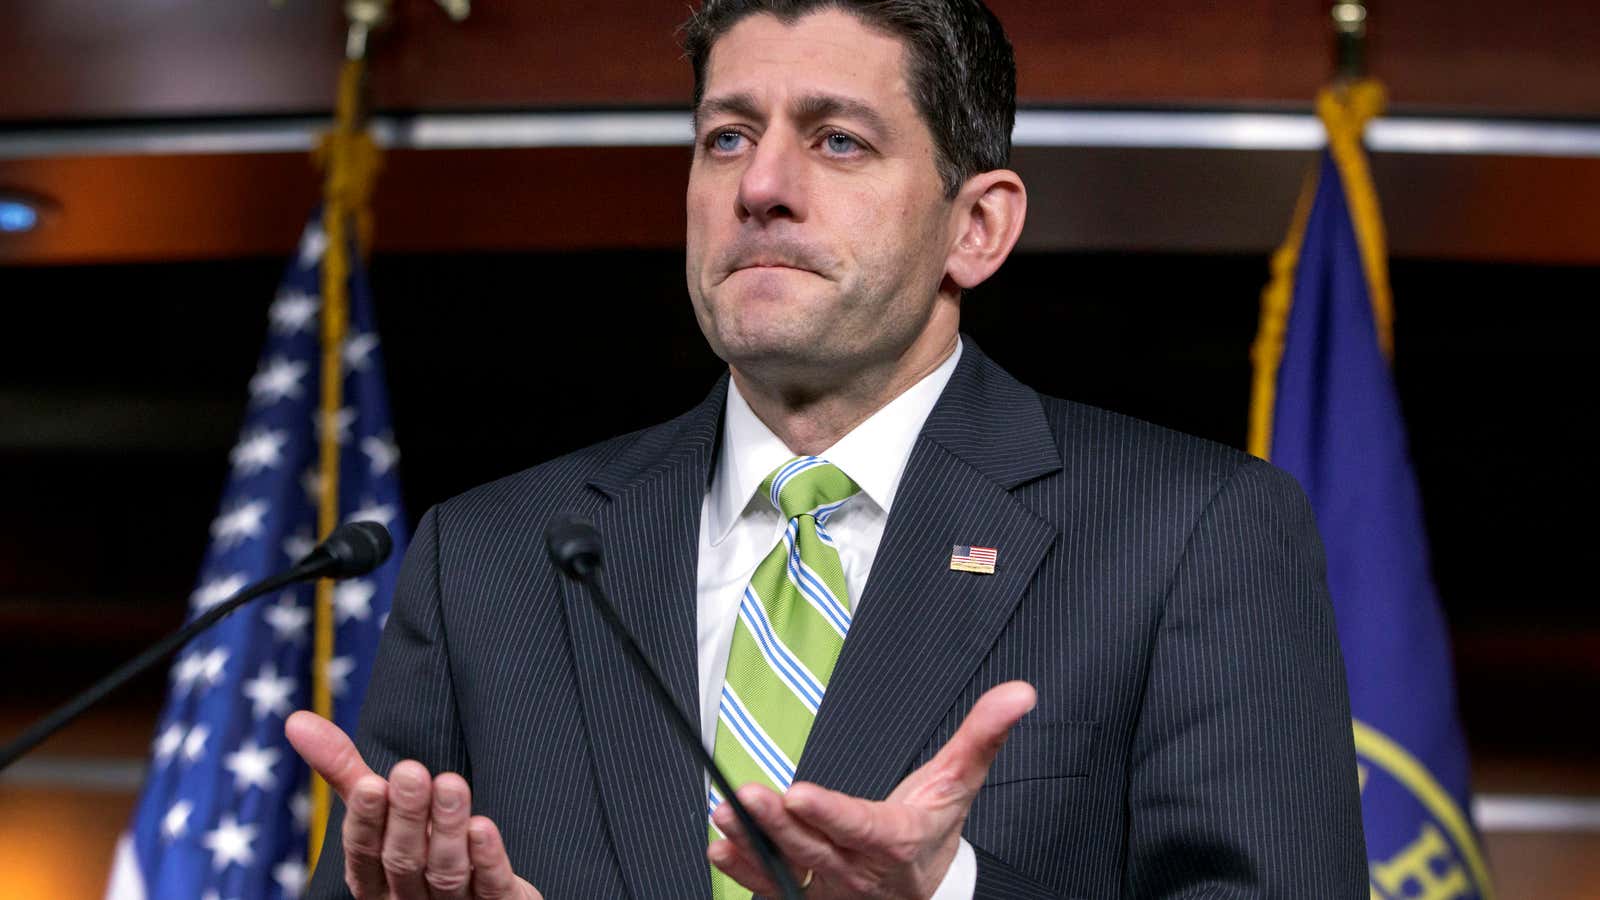 Speaker of the House Paul Ryan expected so much more.